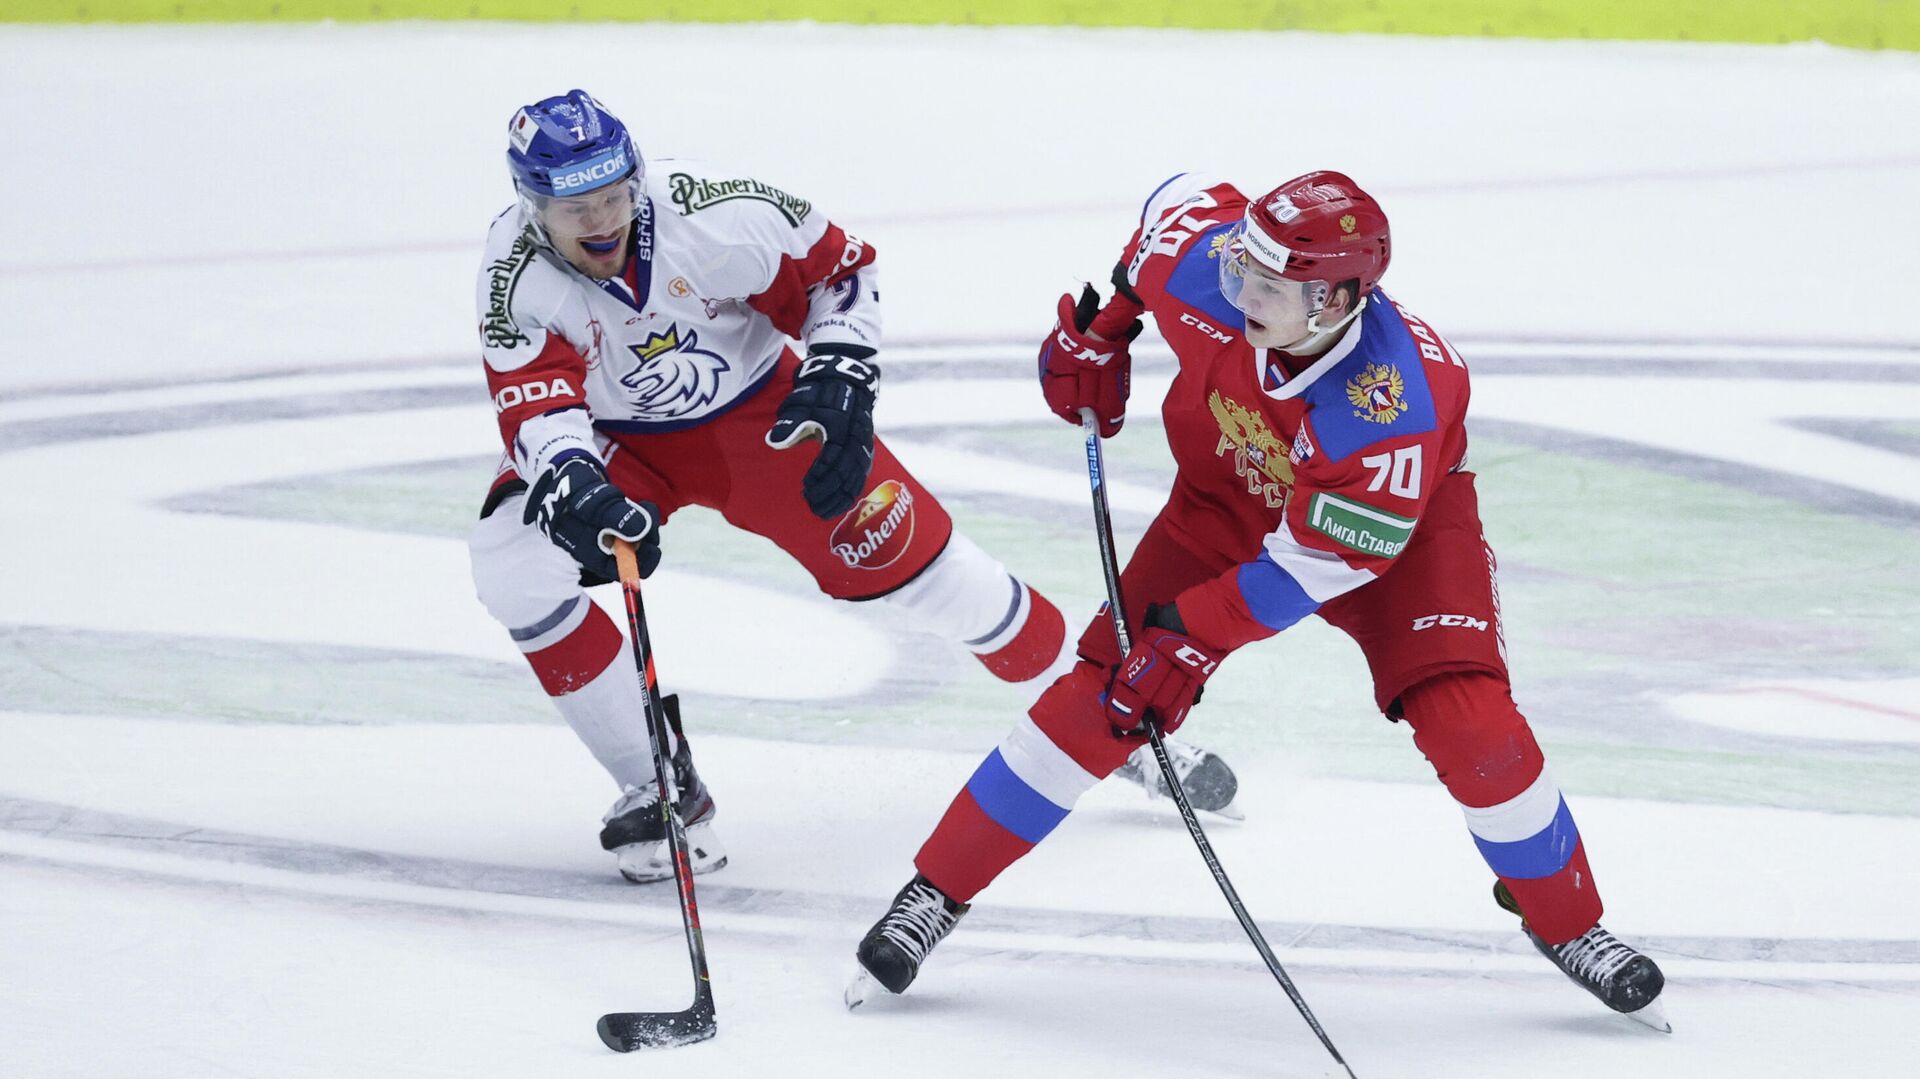 Ice Hockey - Beijer Hockey Games - Russia v Czech Republic - Malmo Arena, Malmo, Sweden - February 14, 2021 Russia's Zakhar Bardakov in action with Czech Republic's David Nemecek TT News Agency via REUTERS/Andreas Hillergren/tt THIS IMAGE HAS BEEN SUPPLIED BY A THIRD PARTY. IT IS DISTRIBUTED, EXACTLY AS RECEIVED BY REUTERS, AS A SERVICE TO CLIENTS. SWEDEN OUT. NO COMMERCIAL OR EDITORIAL SALES IN SWEDEN.. - РИА Новости, 1920, 14.02.2021